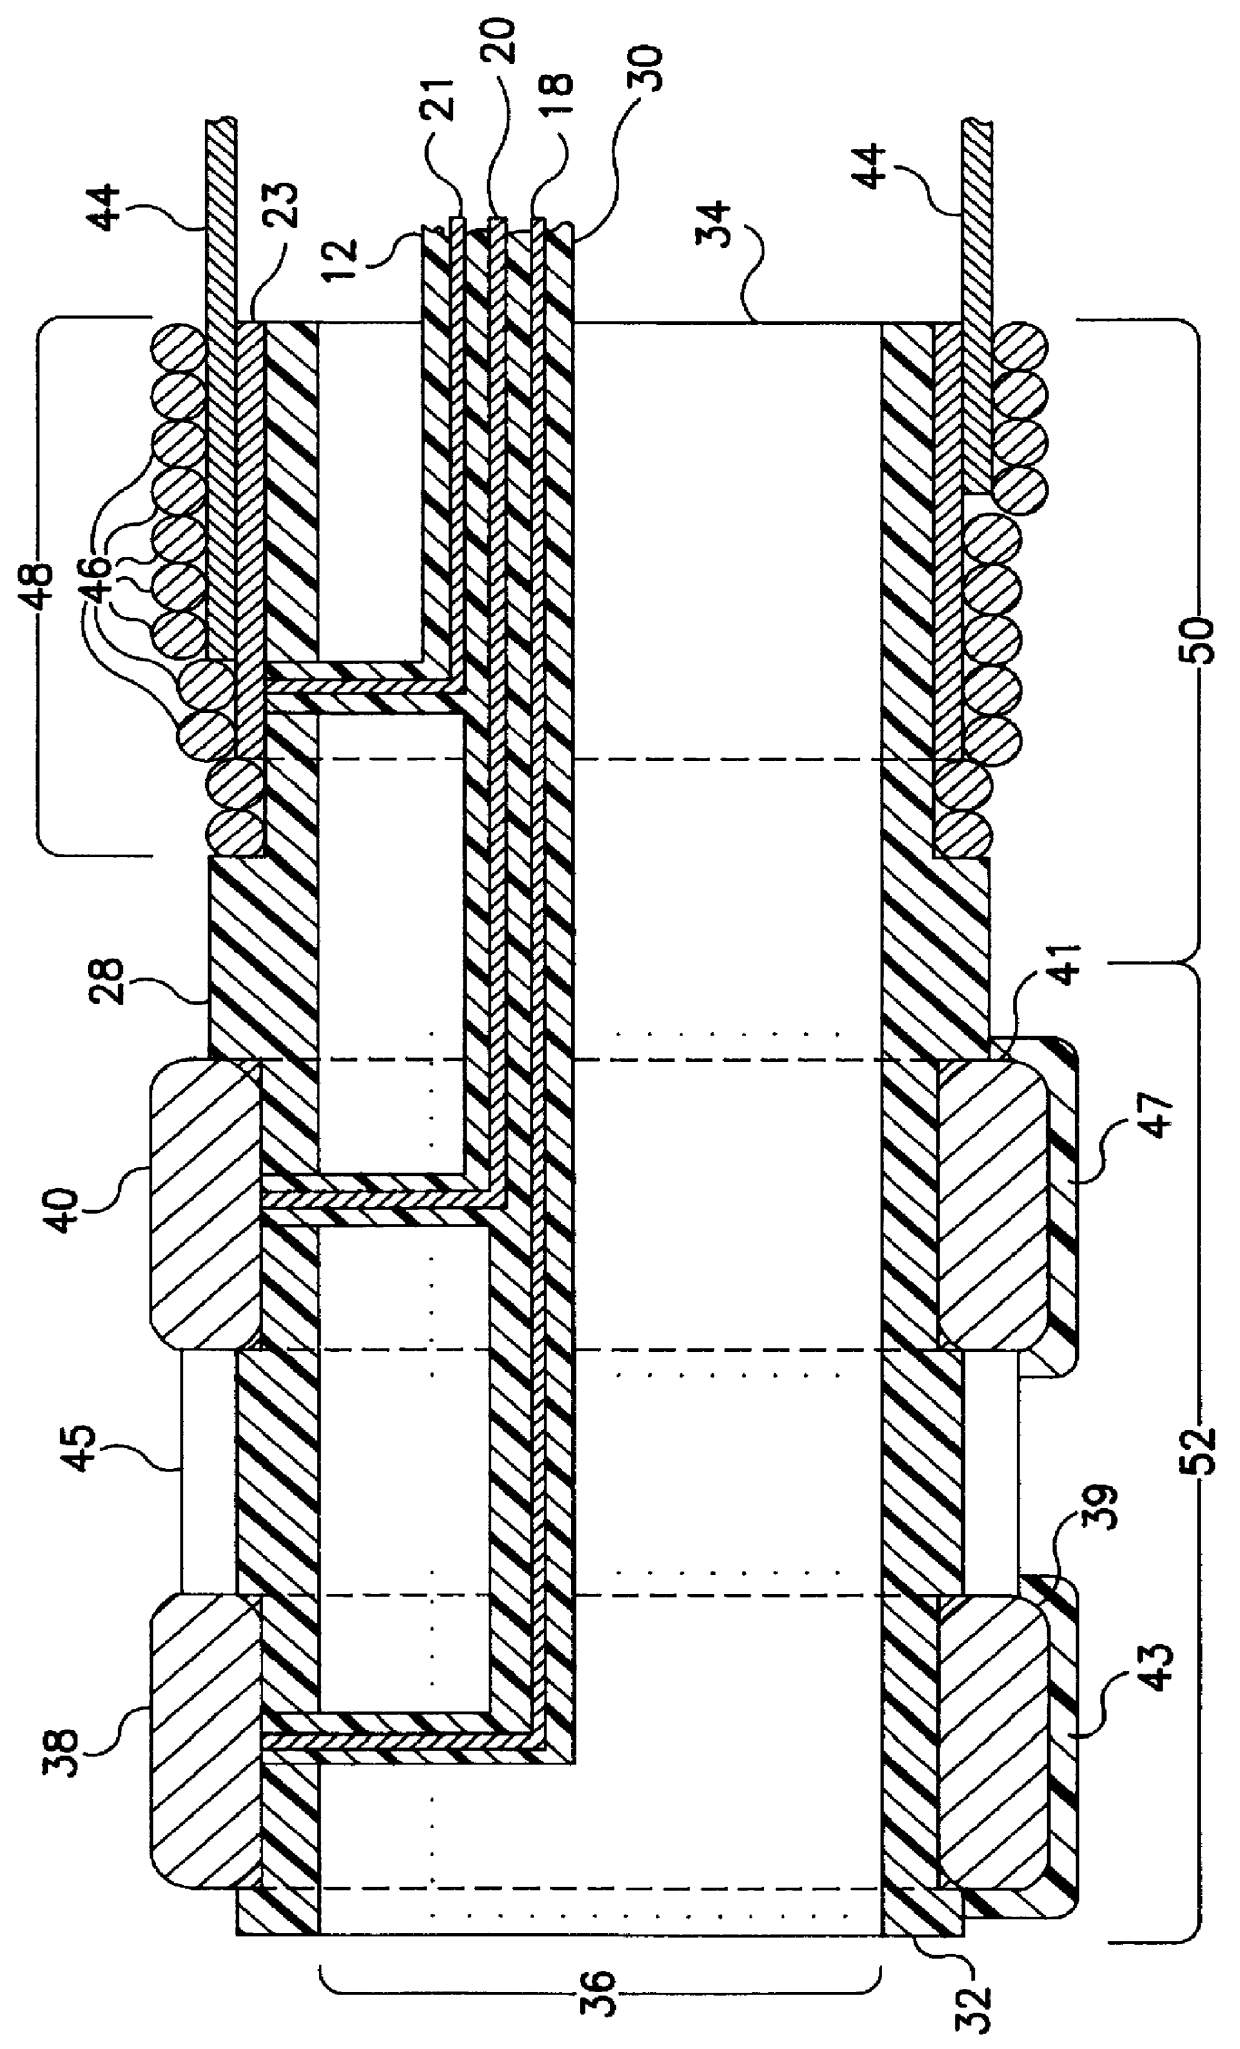 Apparatus and method for fixing electrodes in a blood vessel